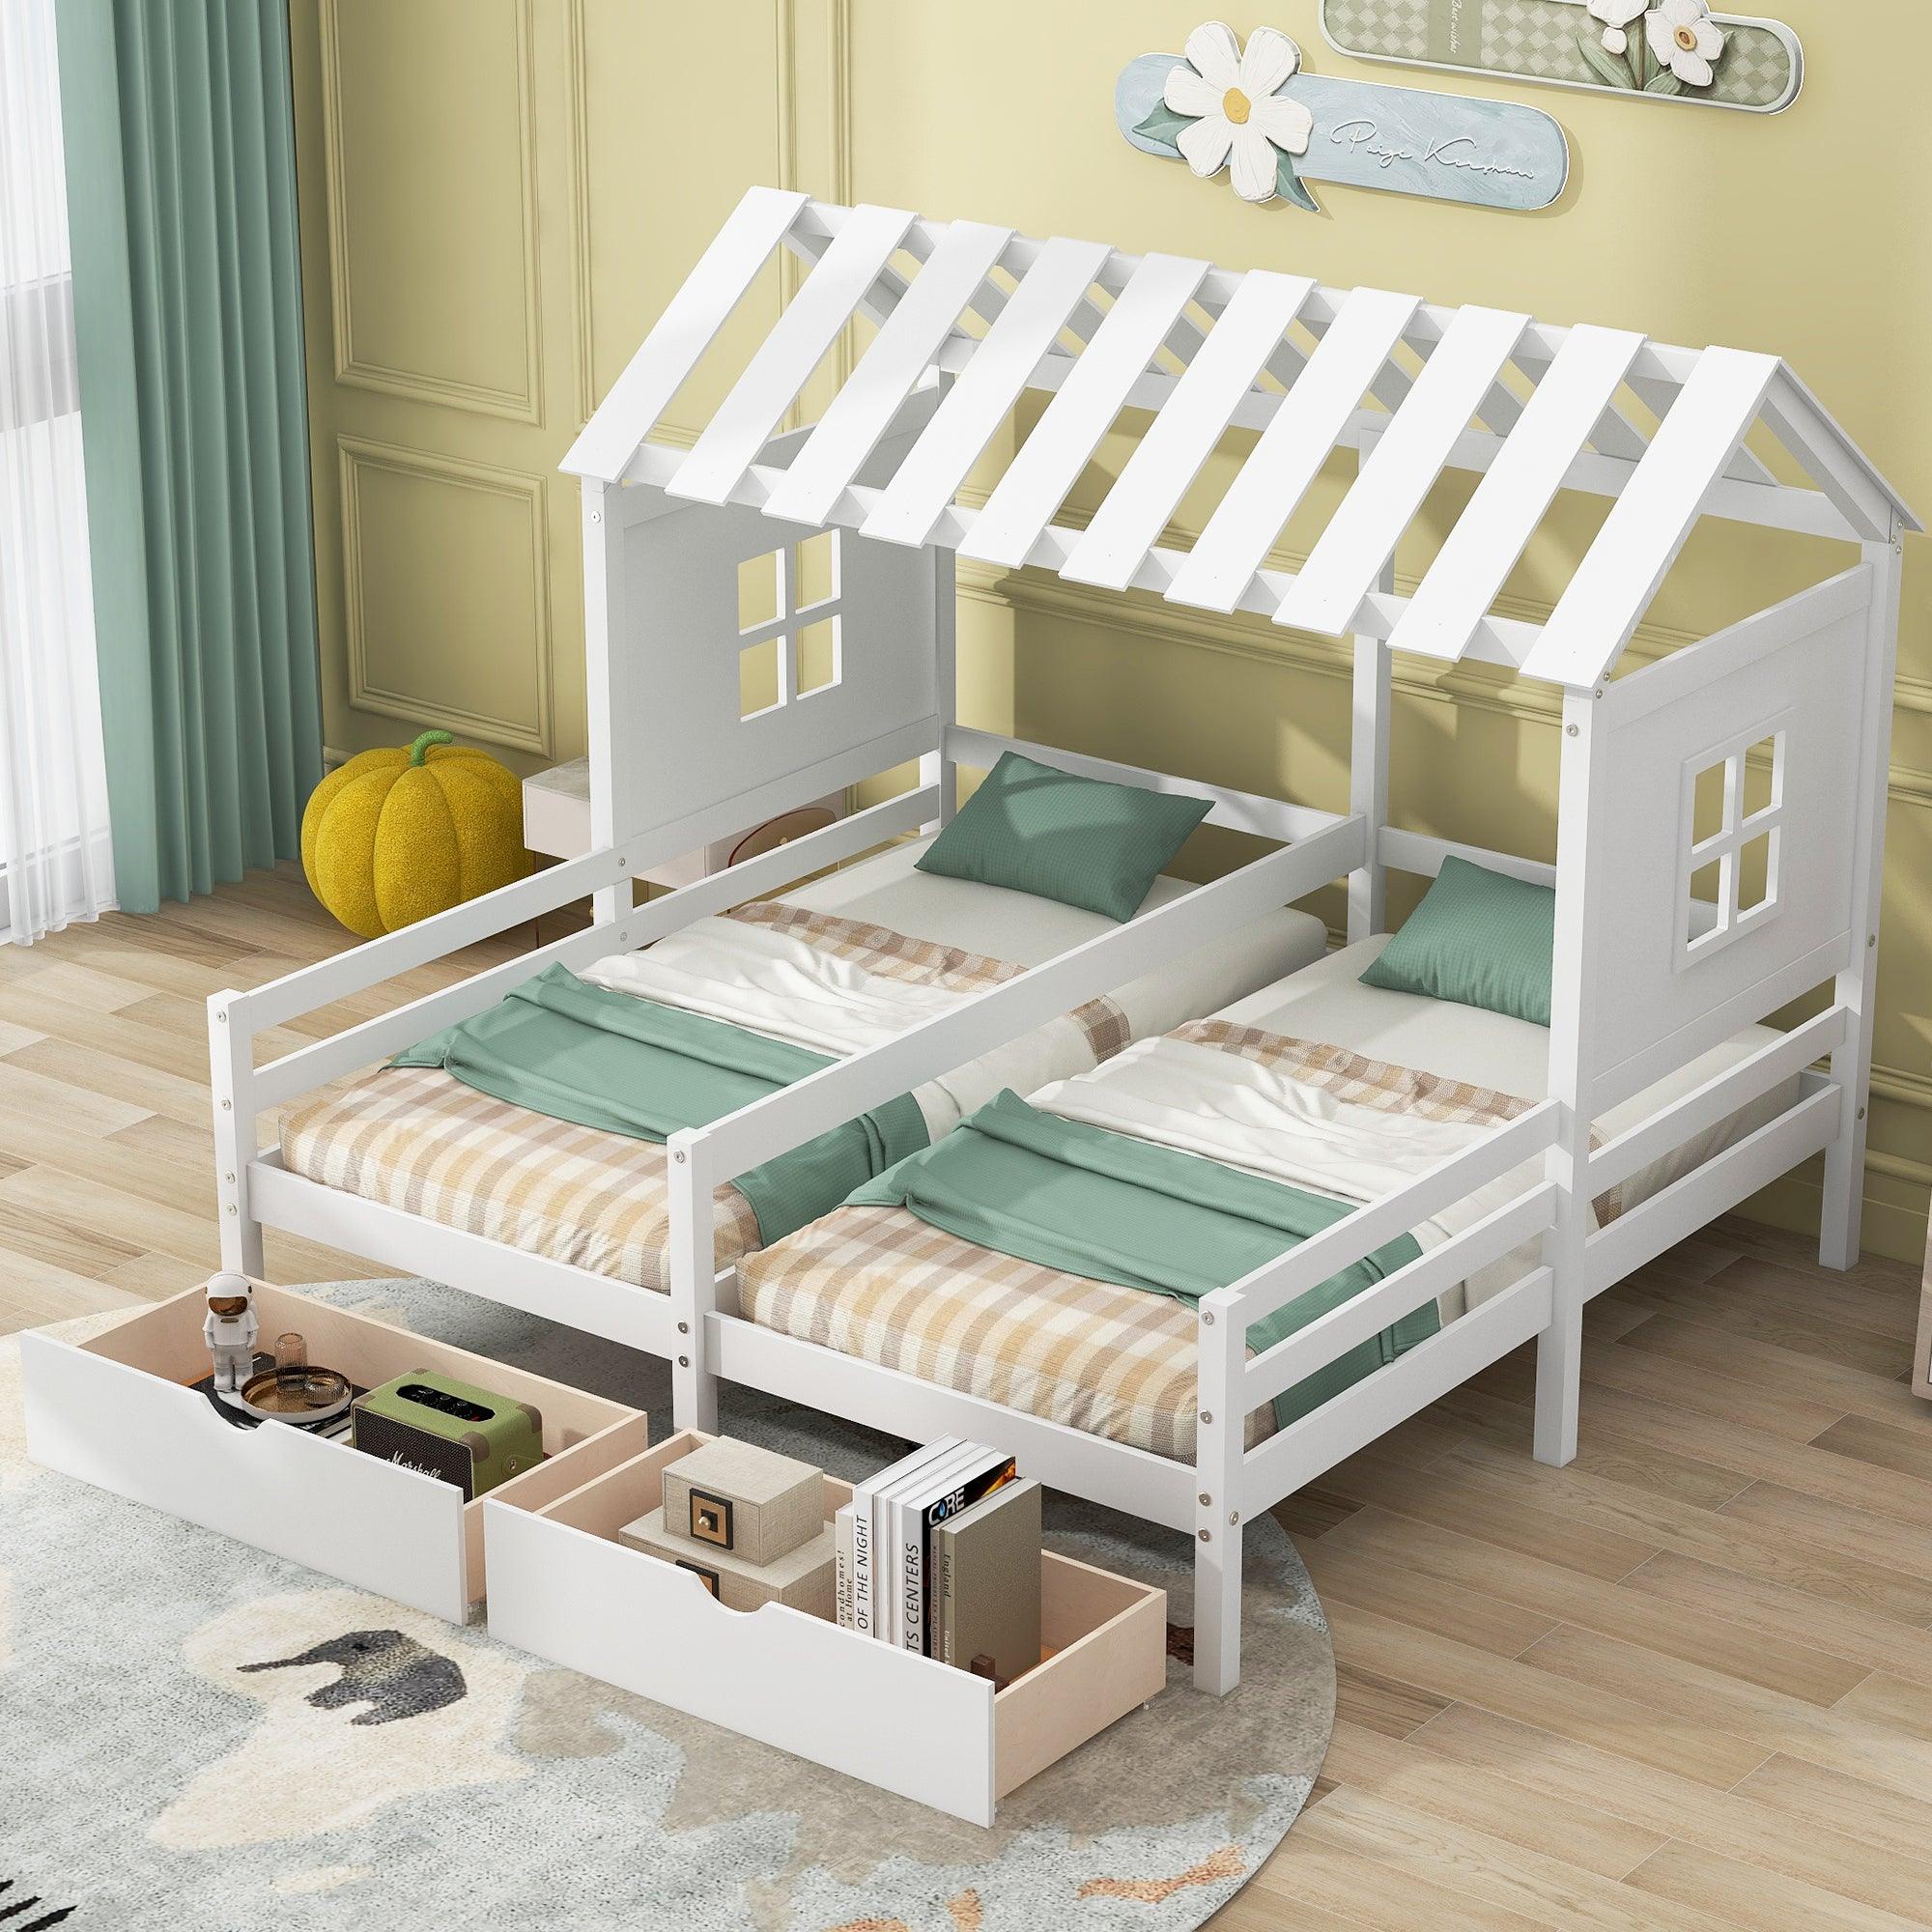 🆓🚛 Twin Size House Platform Beds With Two Drawers Shared Beds, Combination Of 2 Side By Side Twin Size Beds, White